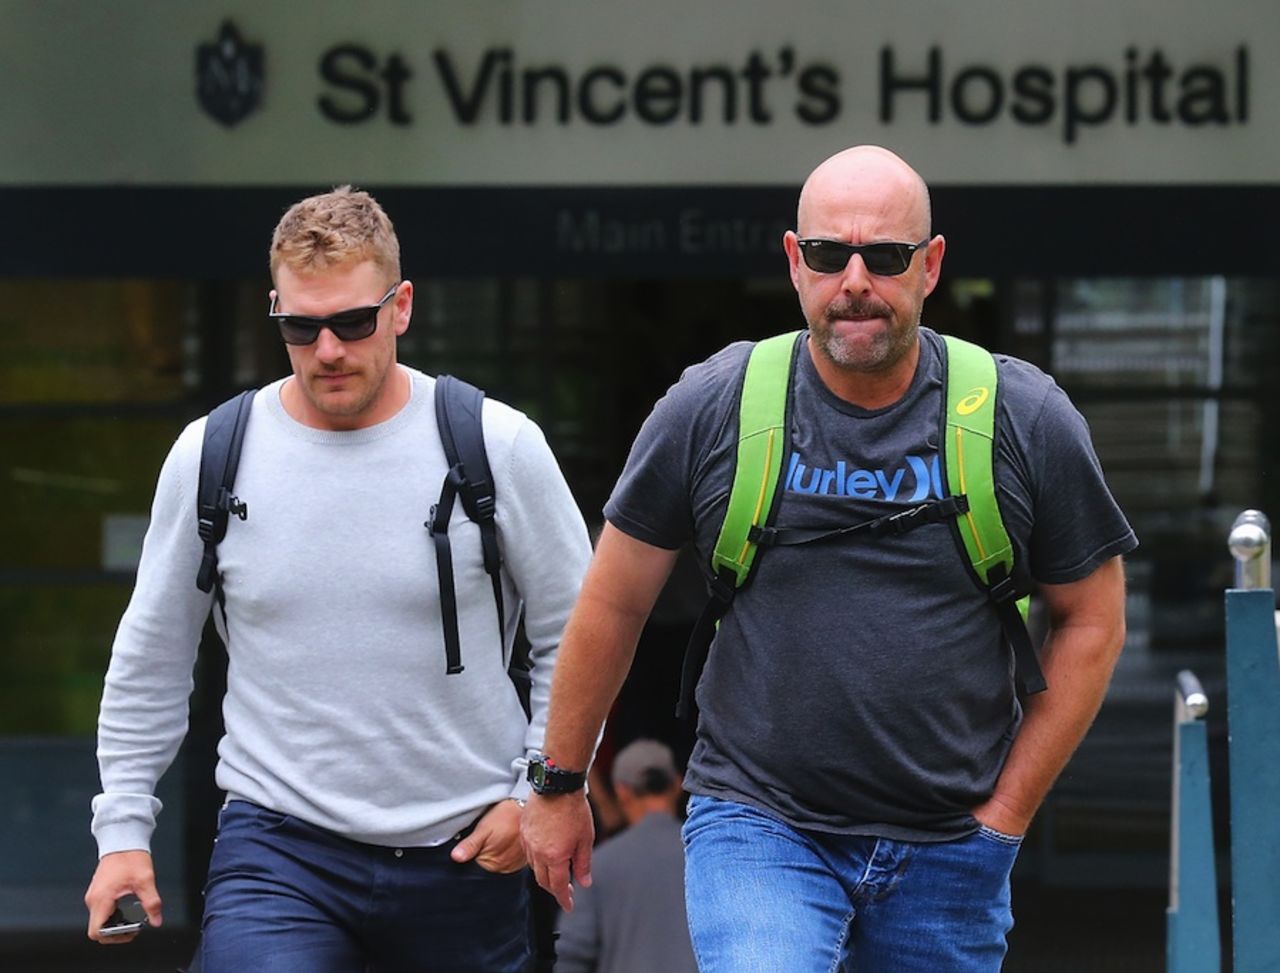 Aaron Finch and Darren Lehmann at St. Vincent's Hospital in Sydney, where Phillip Hughes was treated for a head injury, November 27, 2014